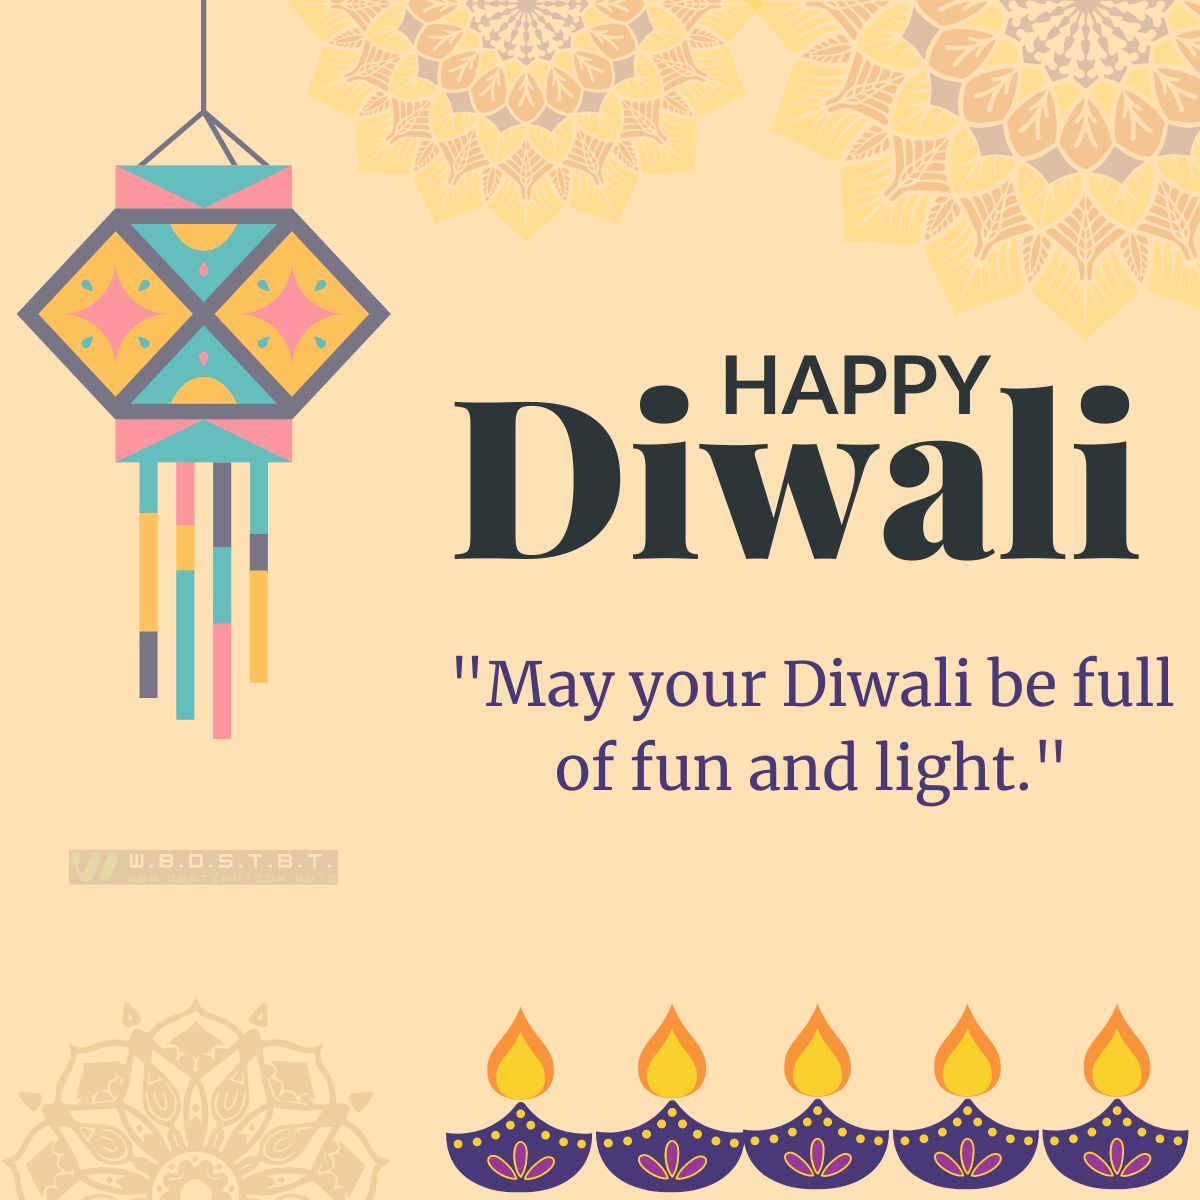 "May your Diwali be full of fun and light."